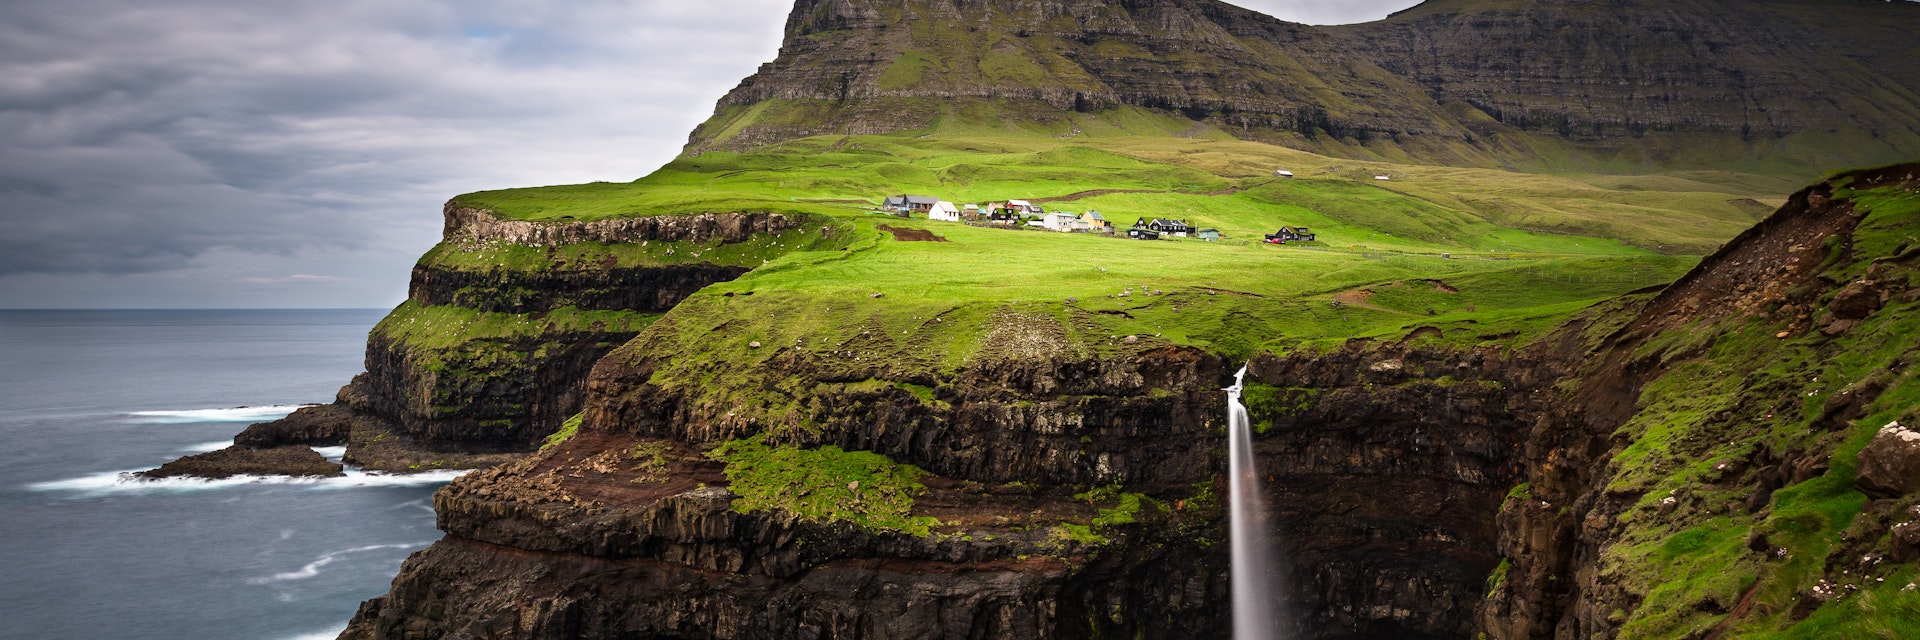 Village of Gasadalur on Faroe Islands..Such a peaceful place with powerful natural forces.